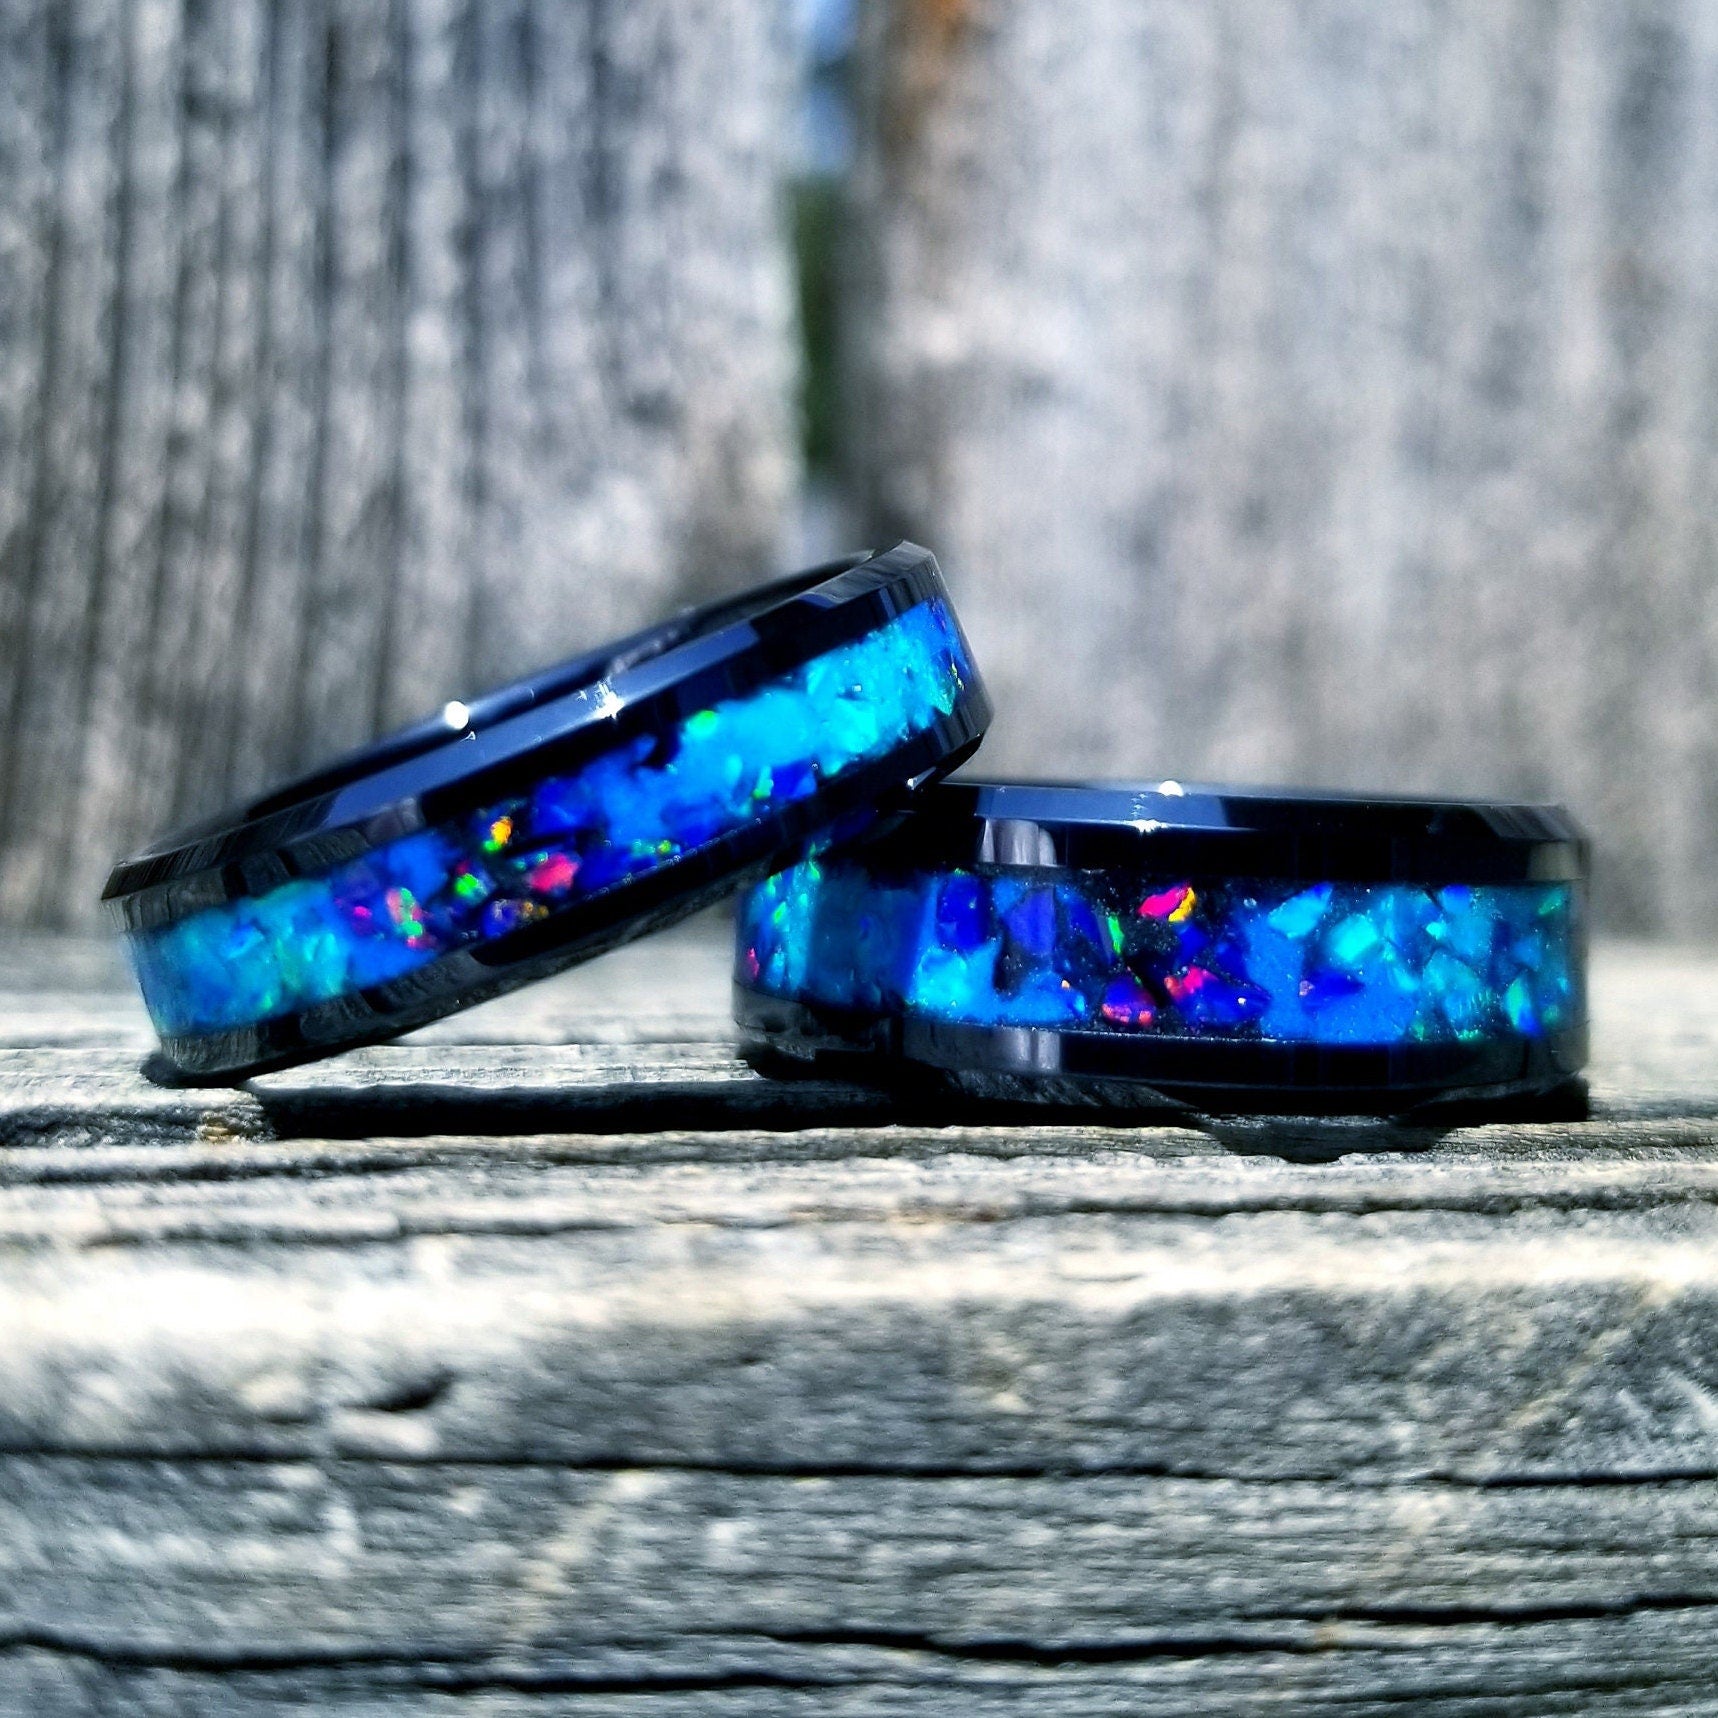 His & Hers Wedding Ring Set- Black Ceramic Ring Set with Green Fire Opal & Glowstone Inlay - 8mm & 6mm Rings - Sizes 5-13 - Orth Custom Rings